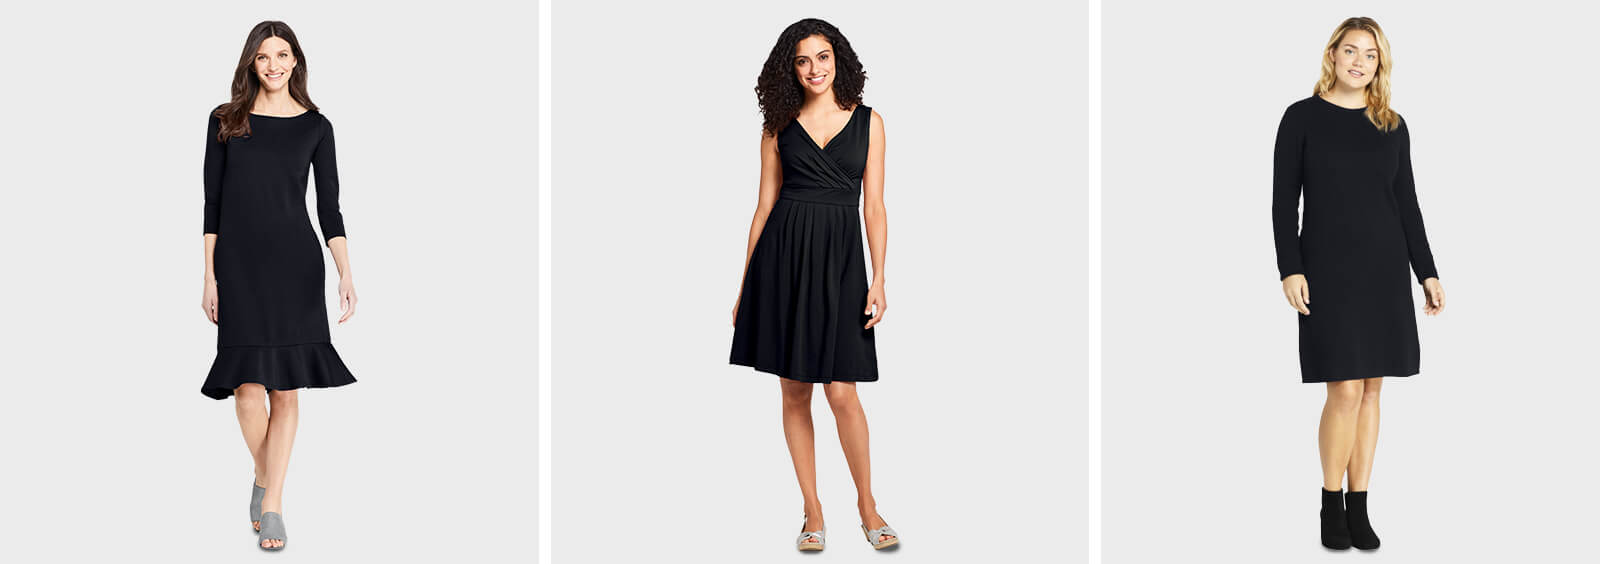 Little Black Dress: Which One Is Best for You? | Lands' End